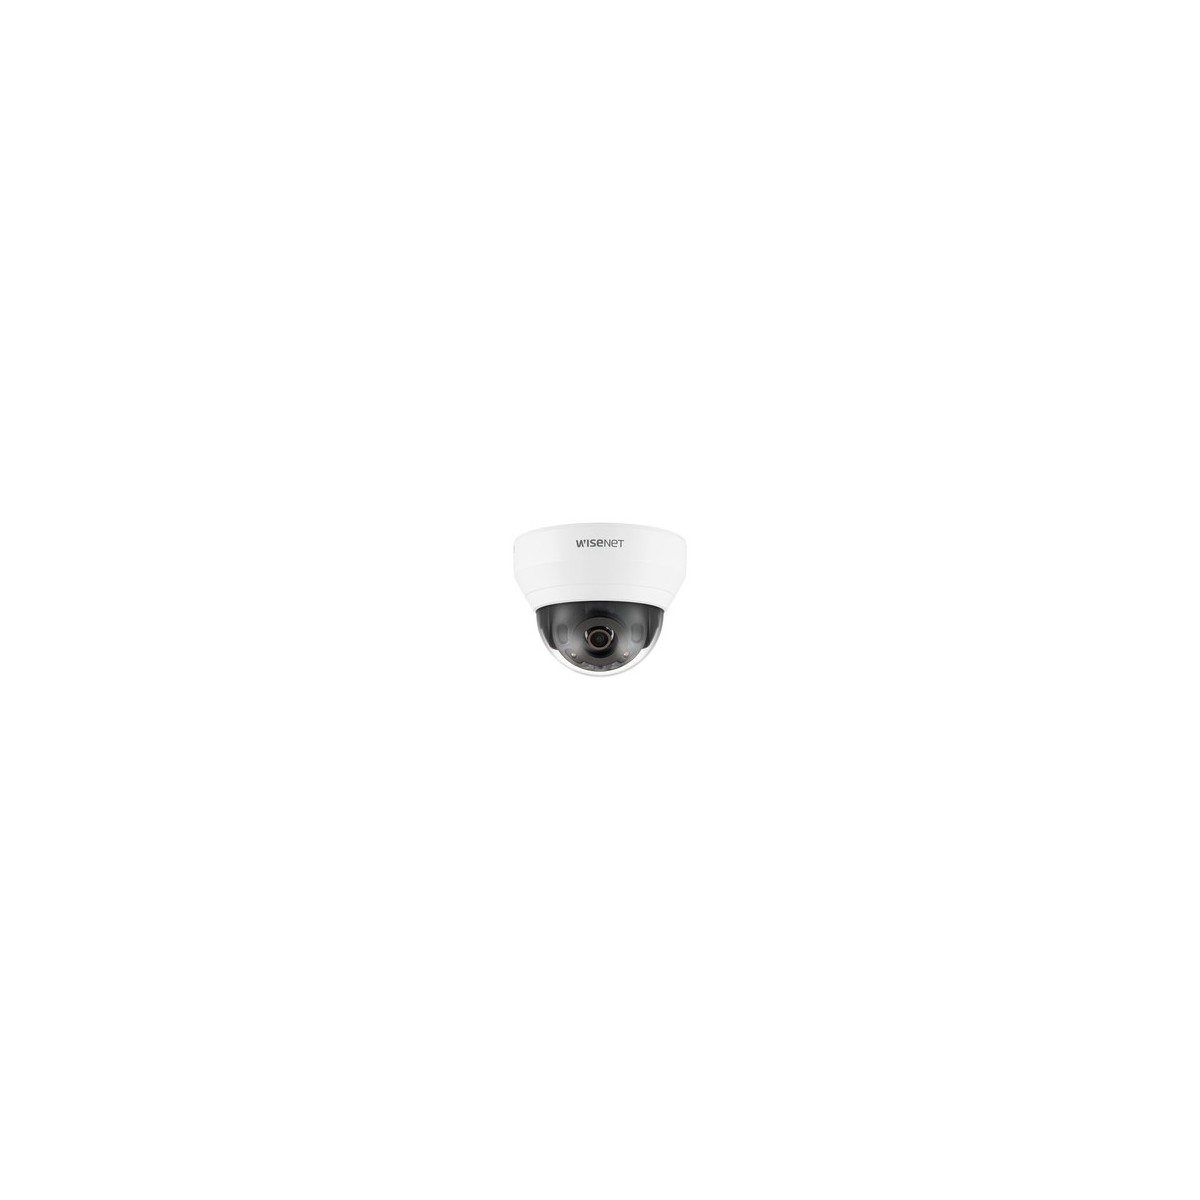 Hanwha Techwin Hanwha QND-7022R - IP security camera - Indoor - Wired - 120 dB - Ceiling-wall - White